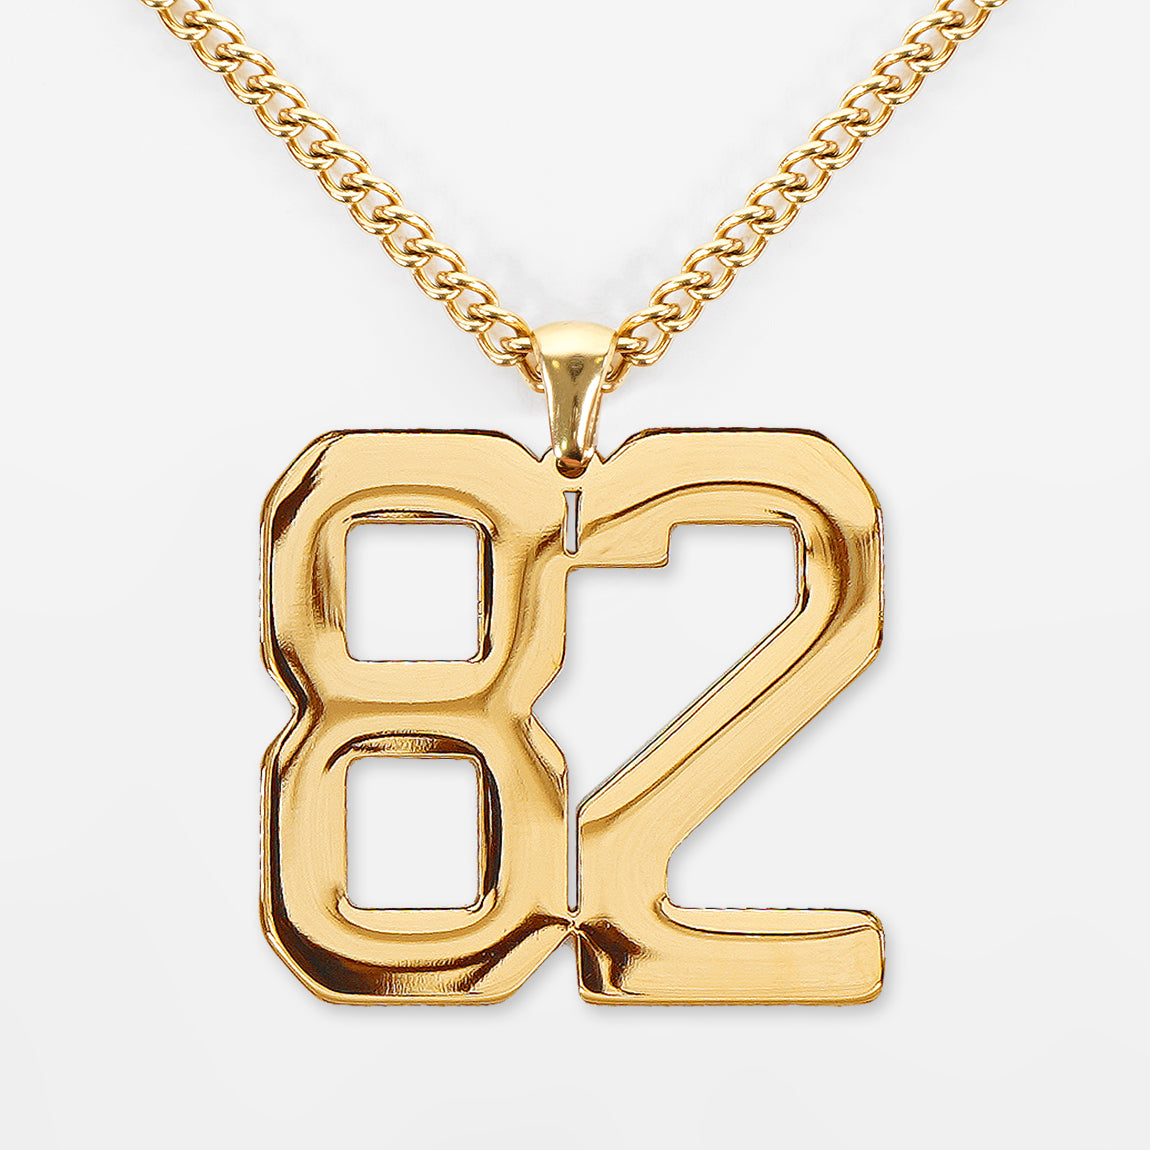 82 Number Pendant with Chain Necklace - Gold Plated Stainless Steel